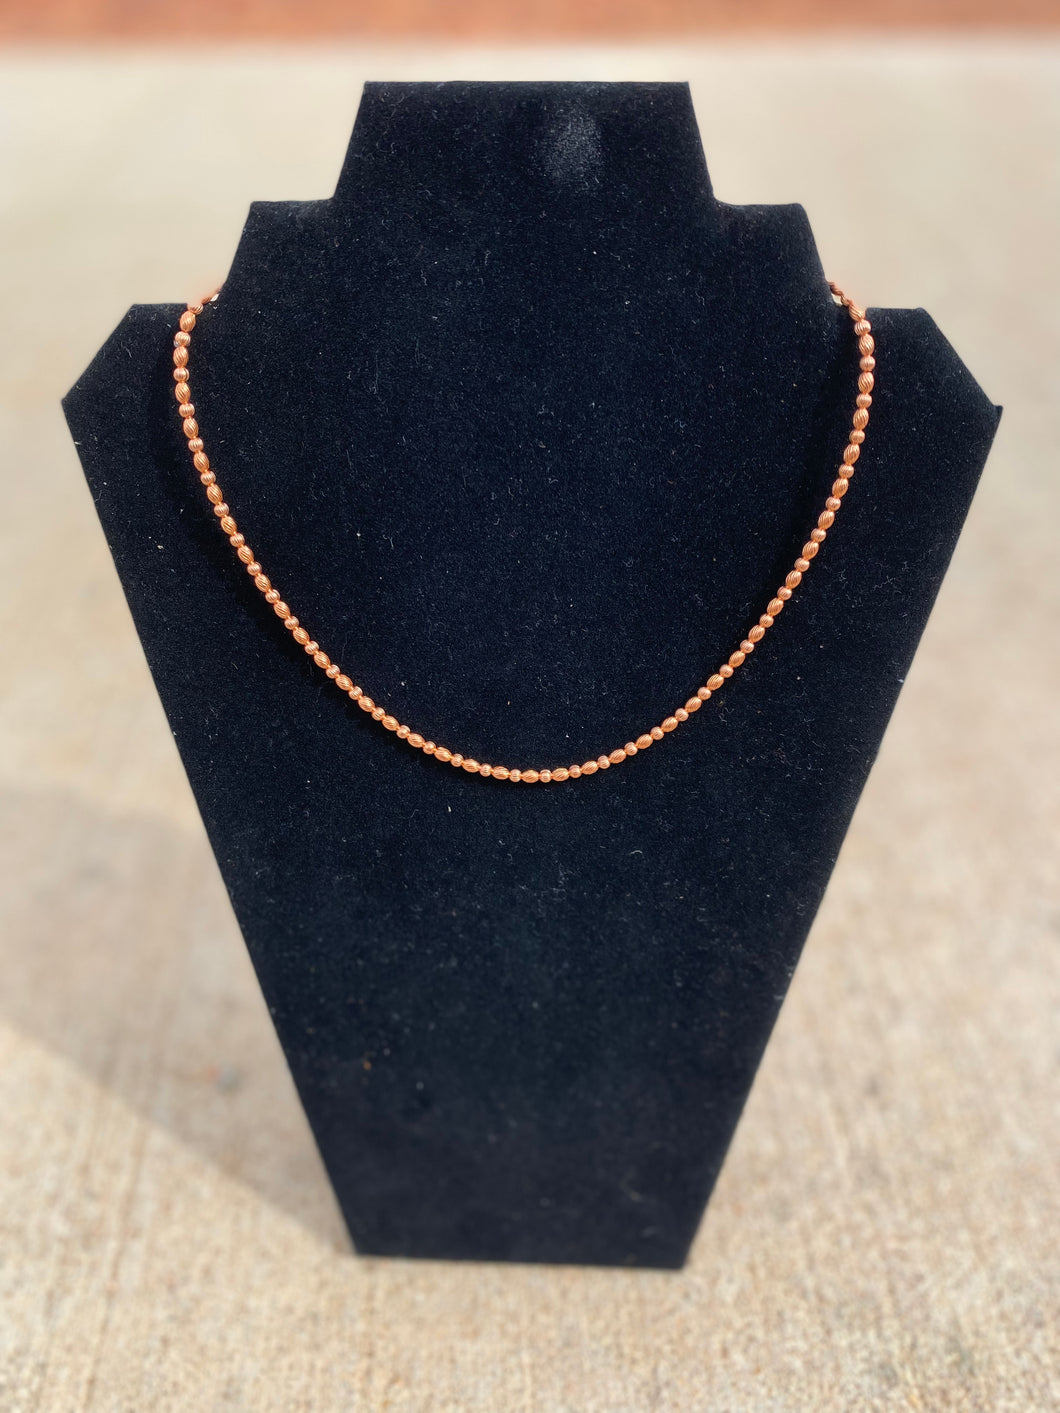 Mixed Shaped Copper Pearls Necklace & Bracelet